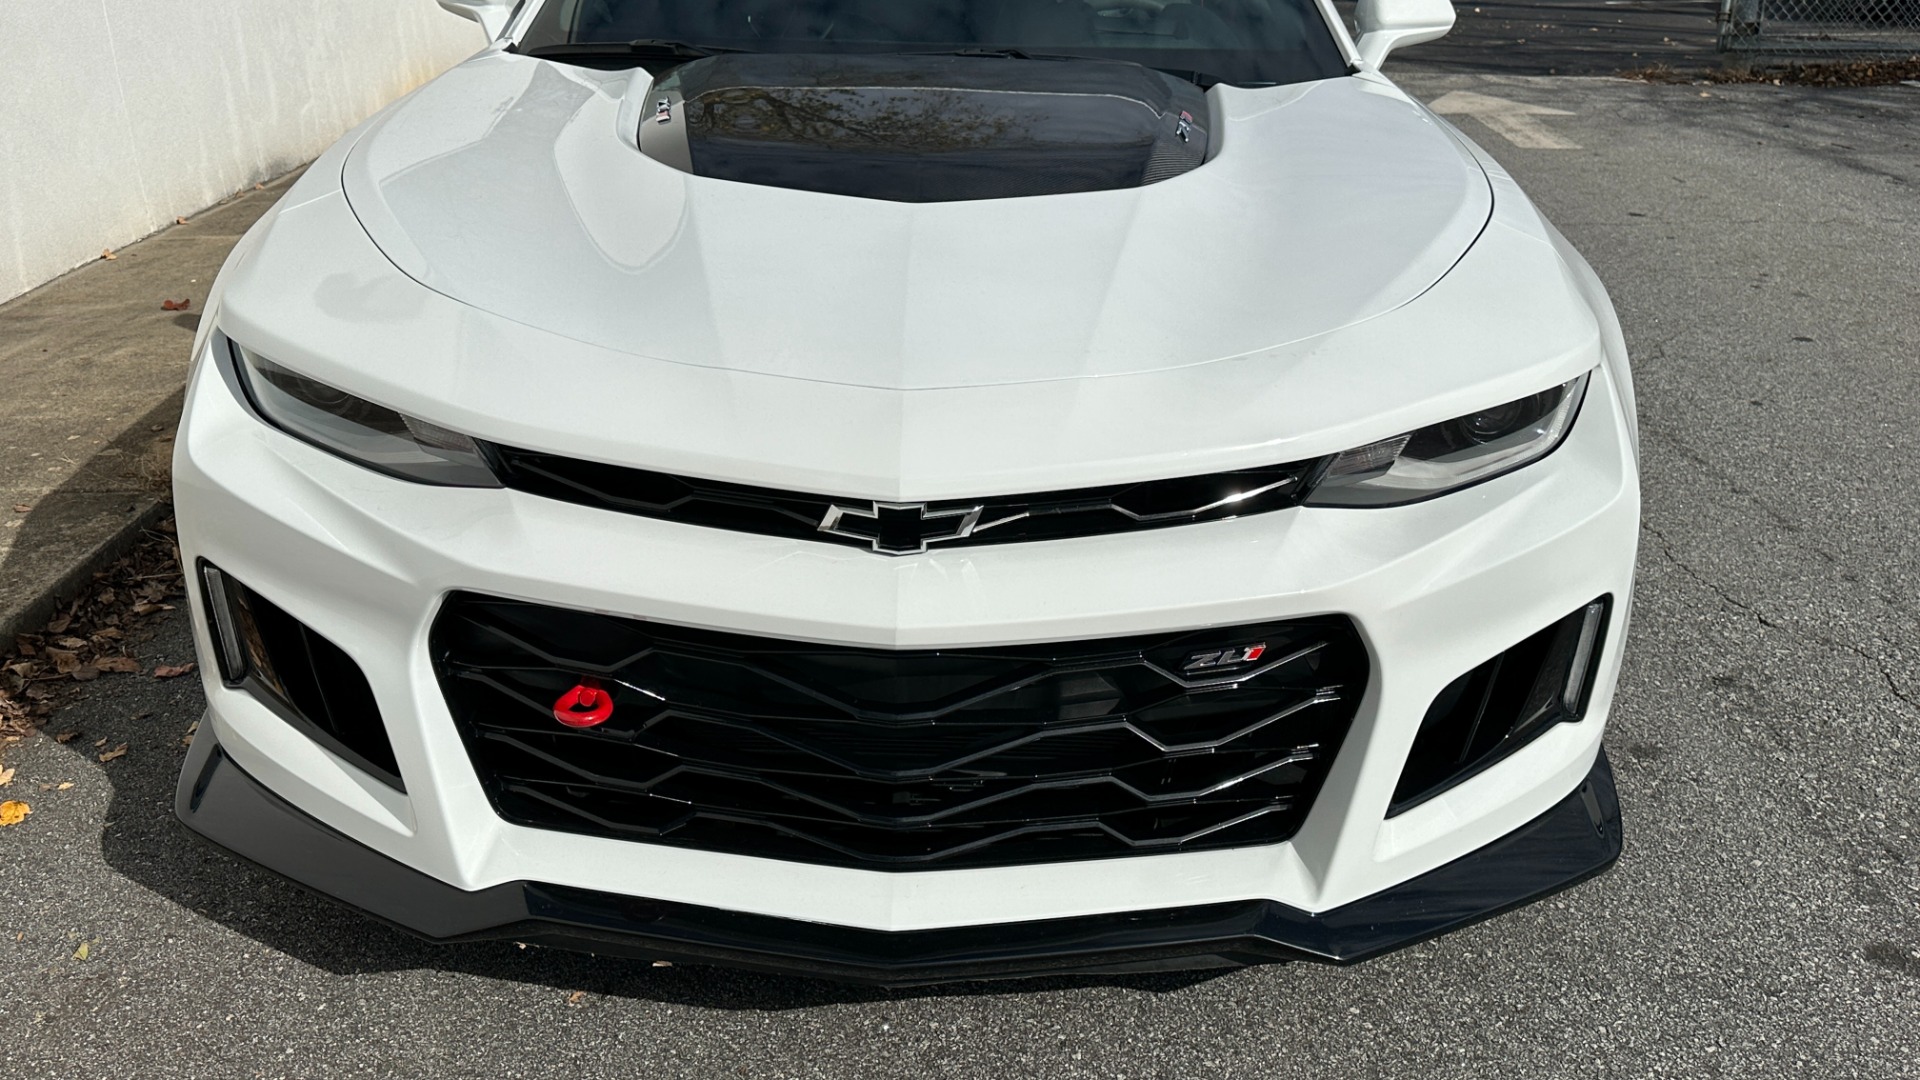 Used 2020 Chevrolet Camaro ZL1 / SUPERCHARGED / CARBON FIBER / RED SEAT BELTS / RECARO SEATING / 10SPD for sale $66,995 at Formula Imports in Charlotte NC 28227 9